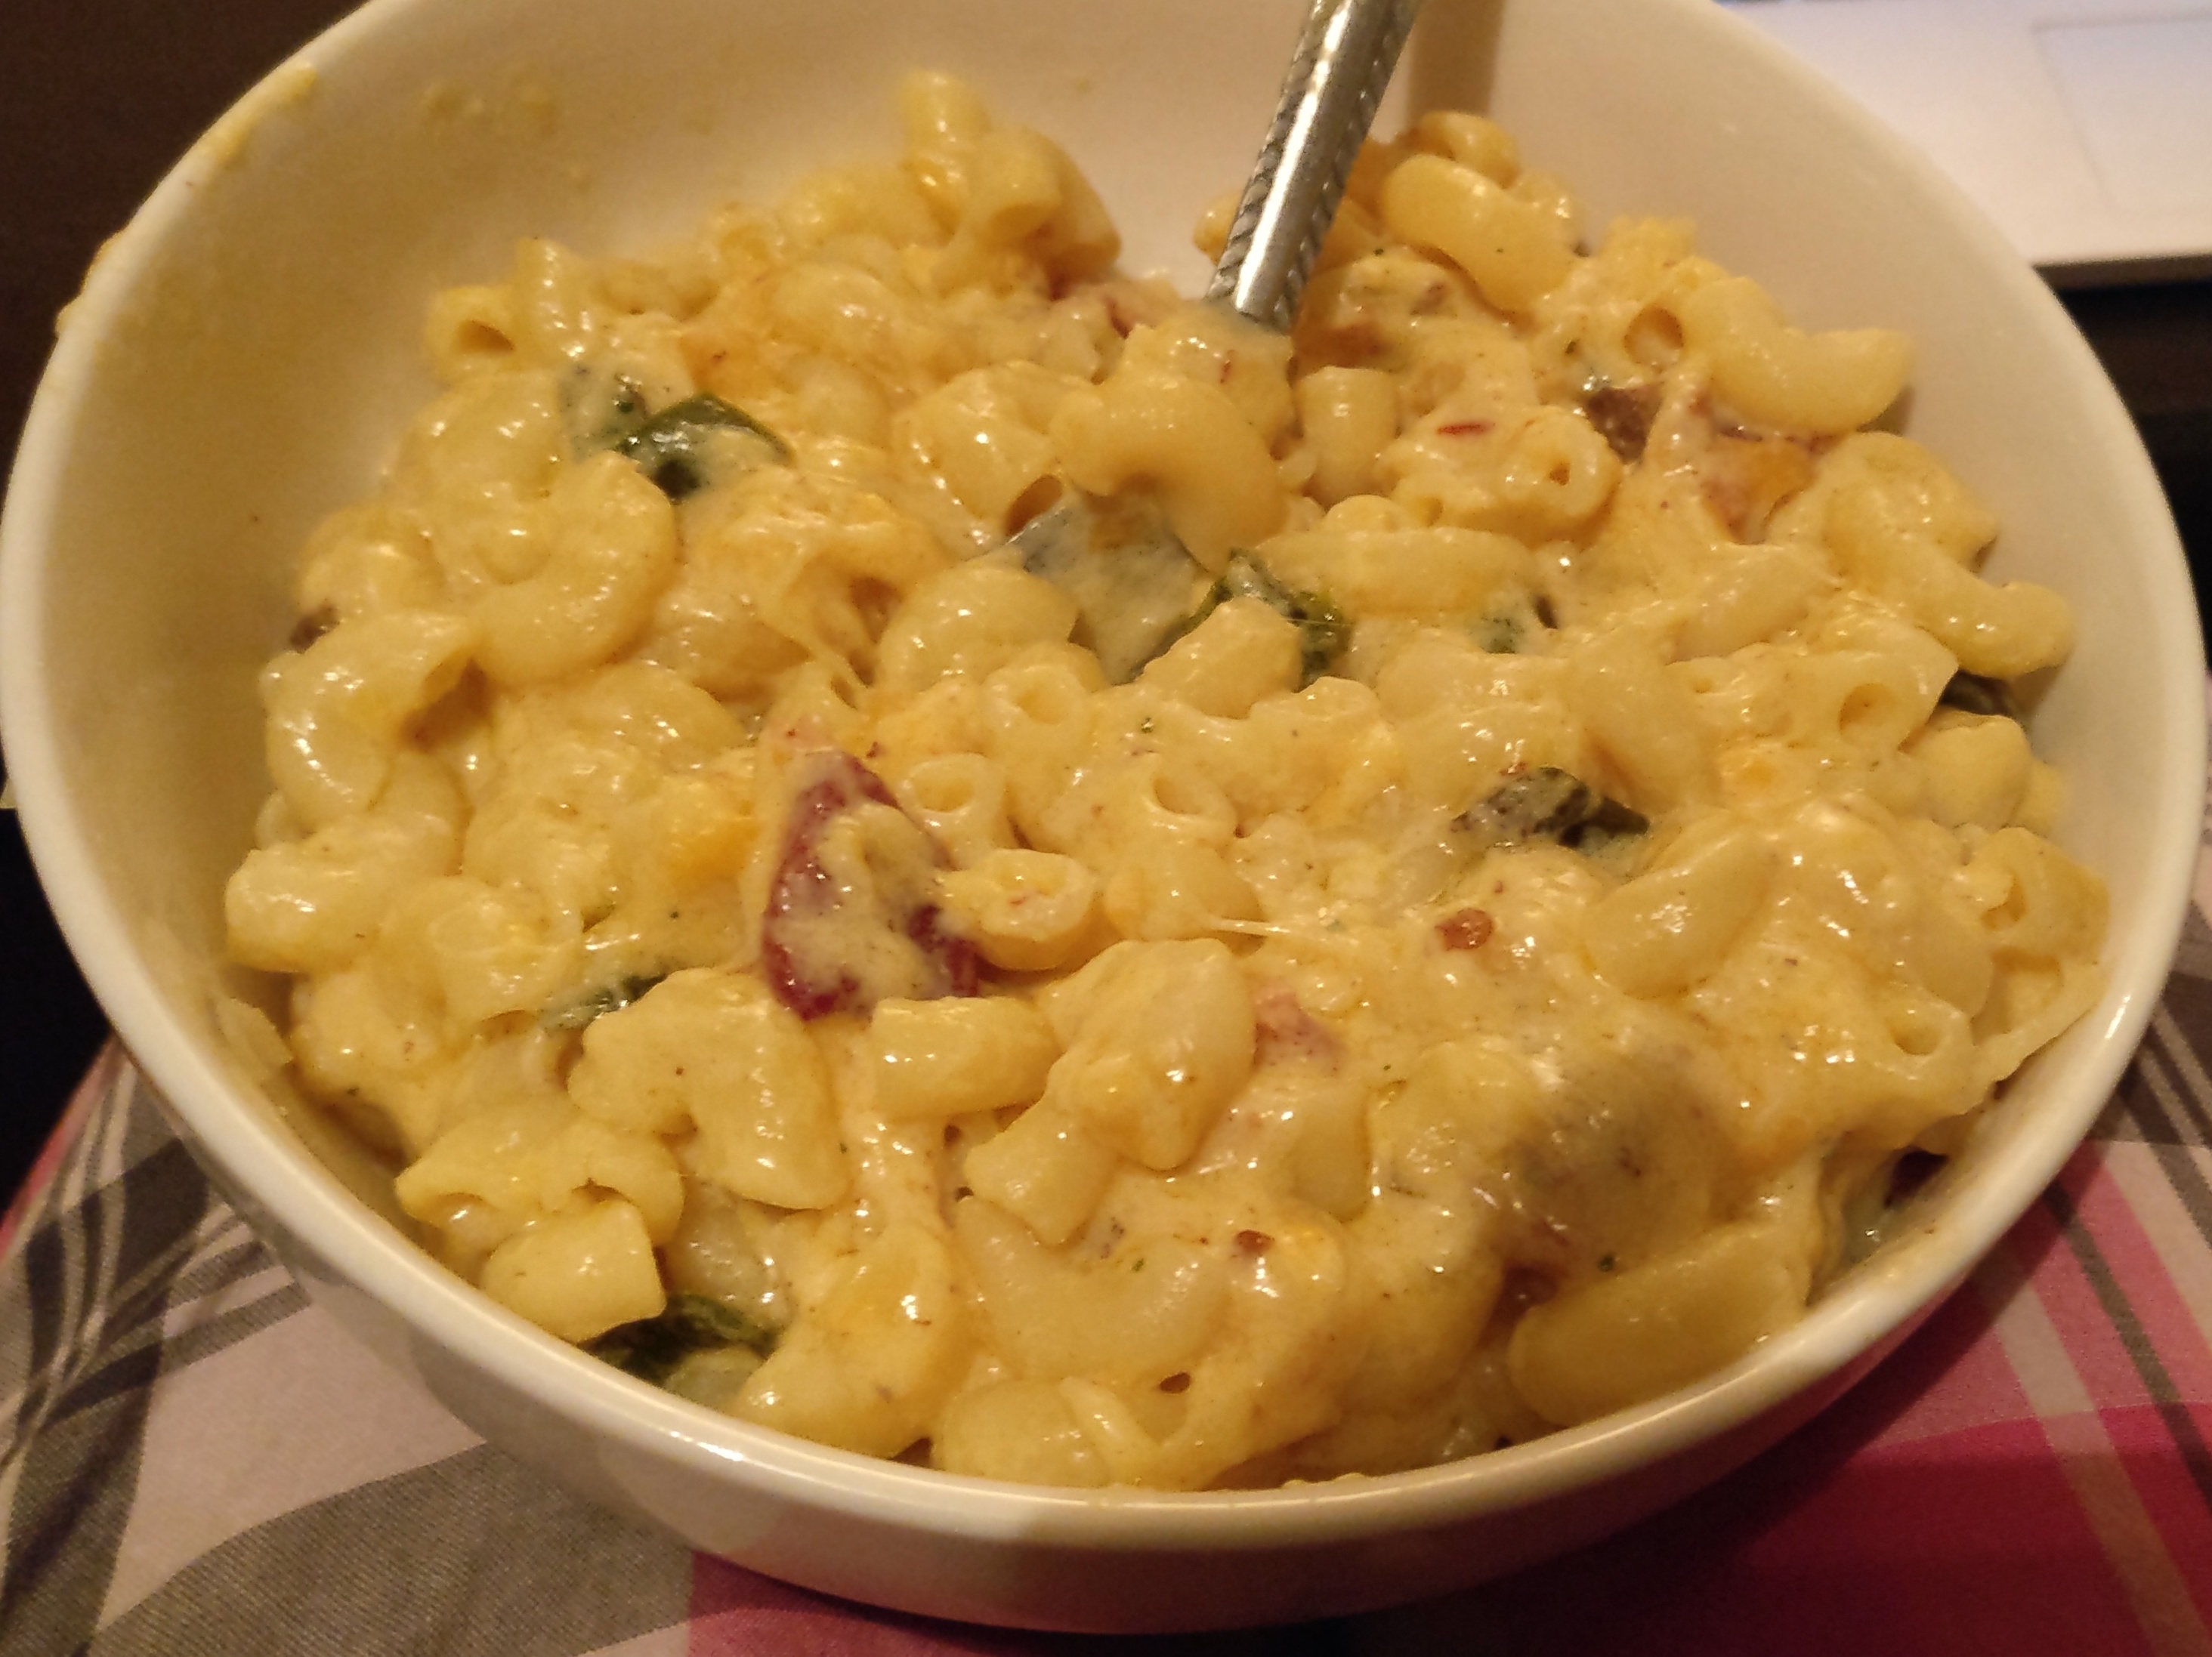 Spicy Jalapeno-Bacon Mac and Cheese